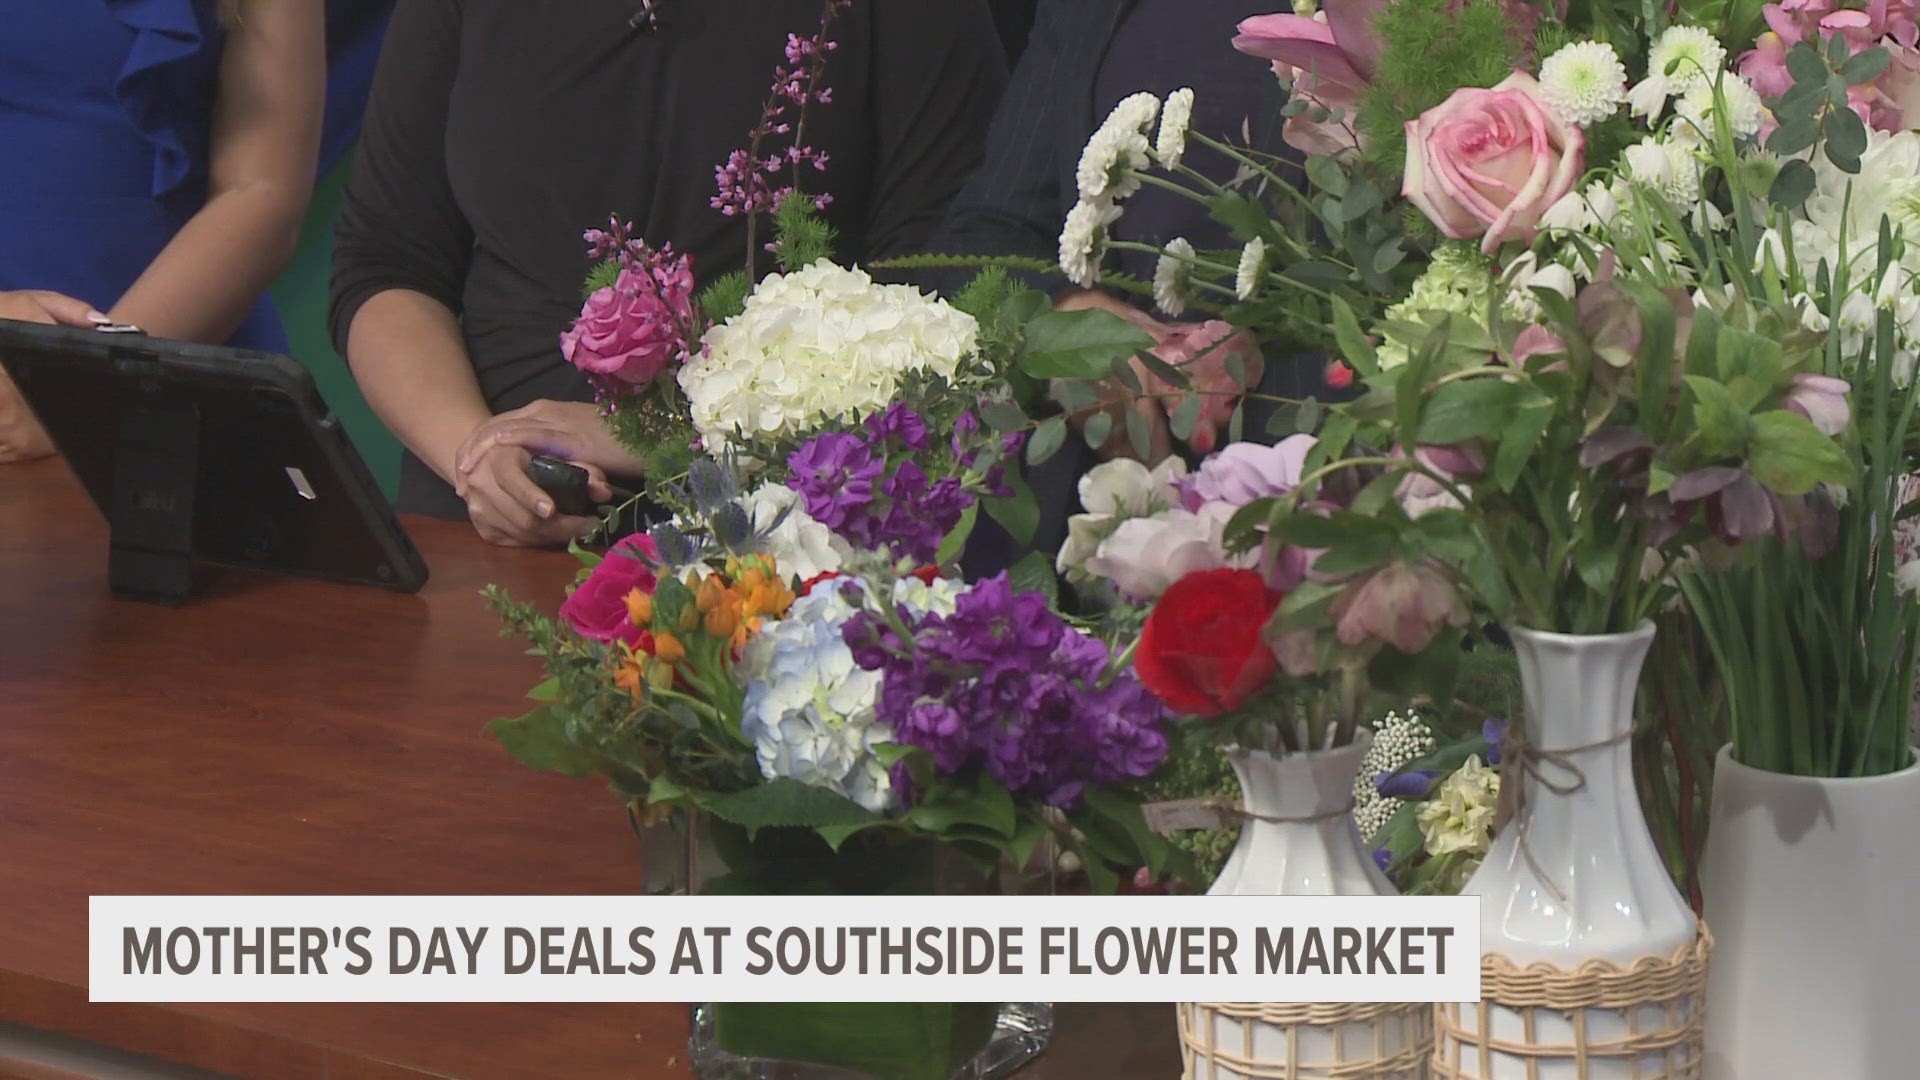 Southside Flower Market doing a special Mother's Day sale.